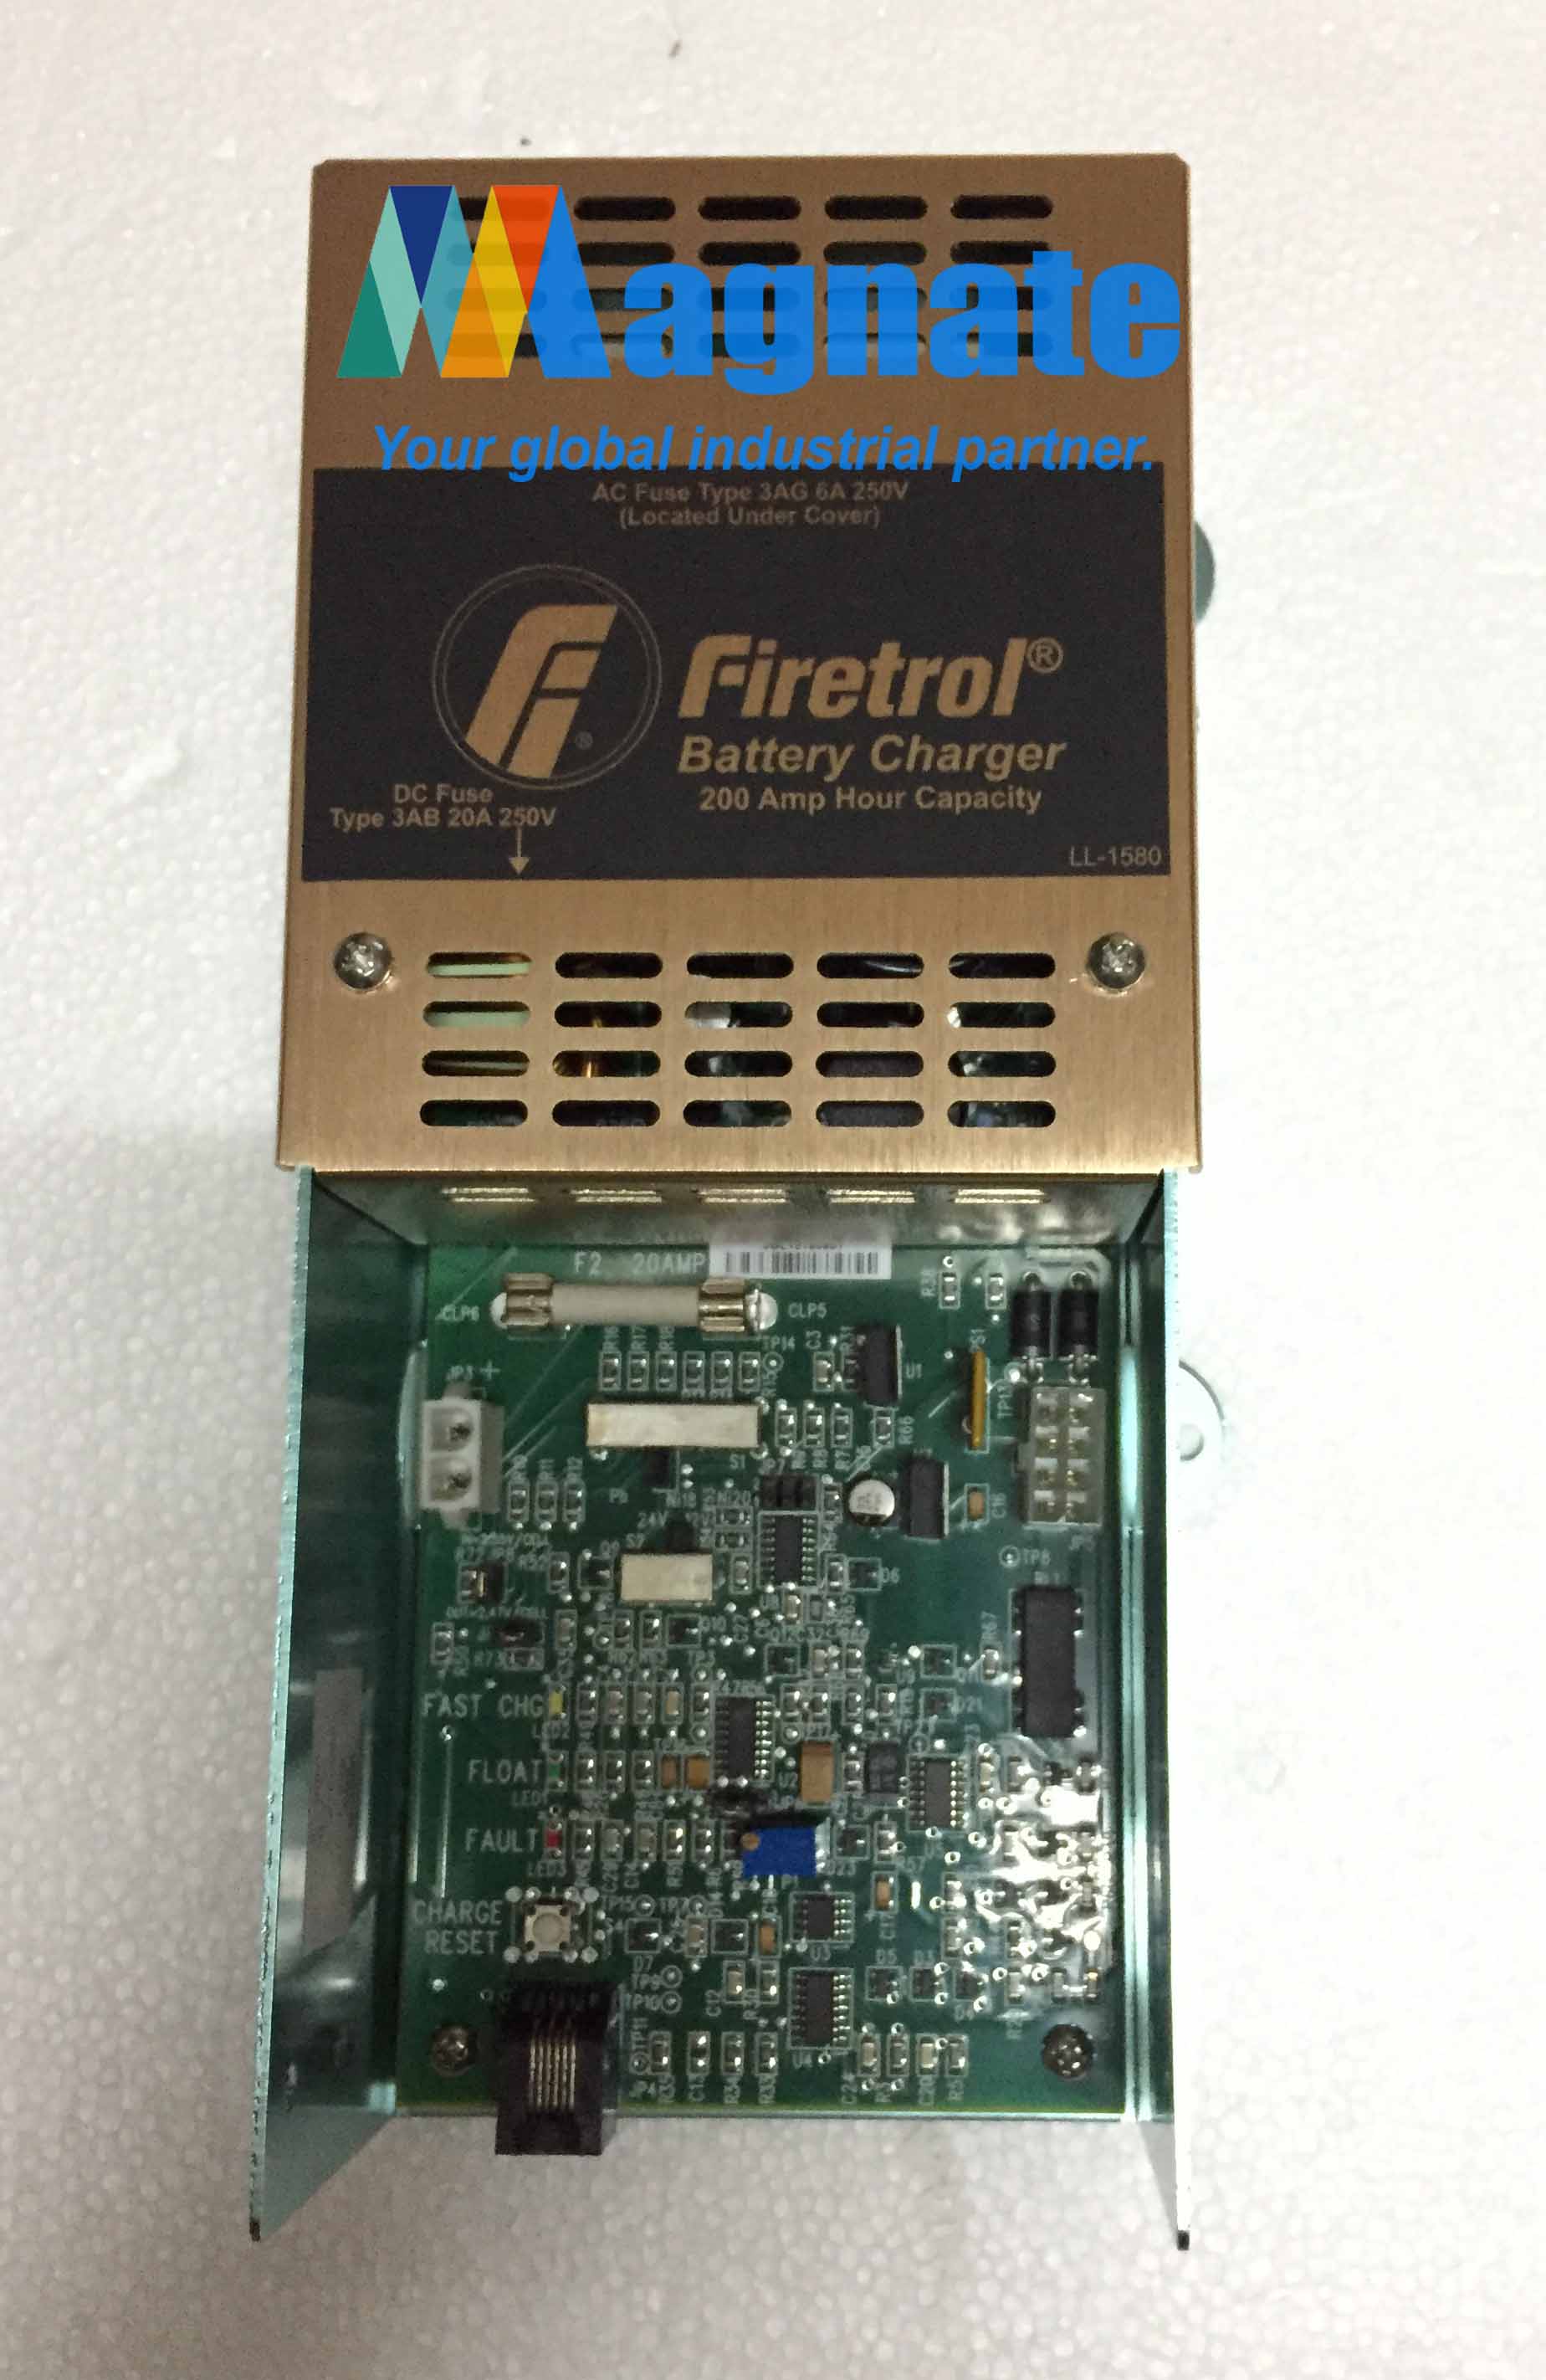 Firetrol Battery Charger AS-2001